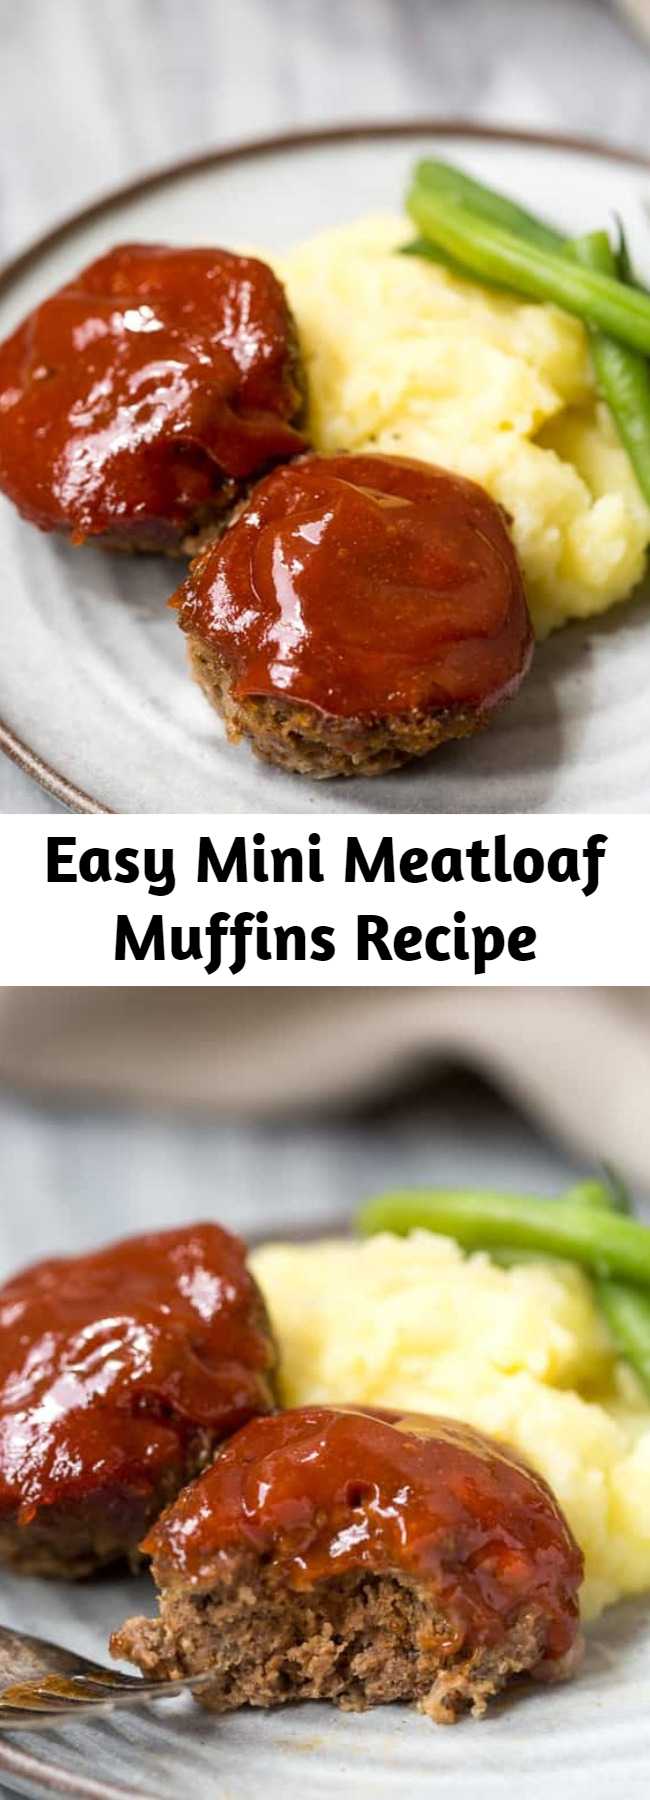 Easy Mini Meatloaf Muffins Recipe - Easy Mini Meatloaf muffins are made with ground beef or ground turkey and topped with a delicious meatloaf sauce.  They are easier and healthier than traditional meatloaf.